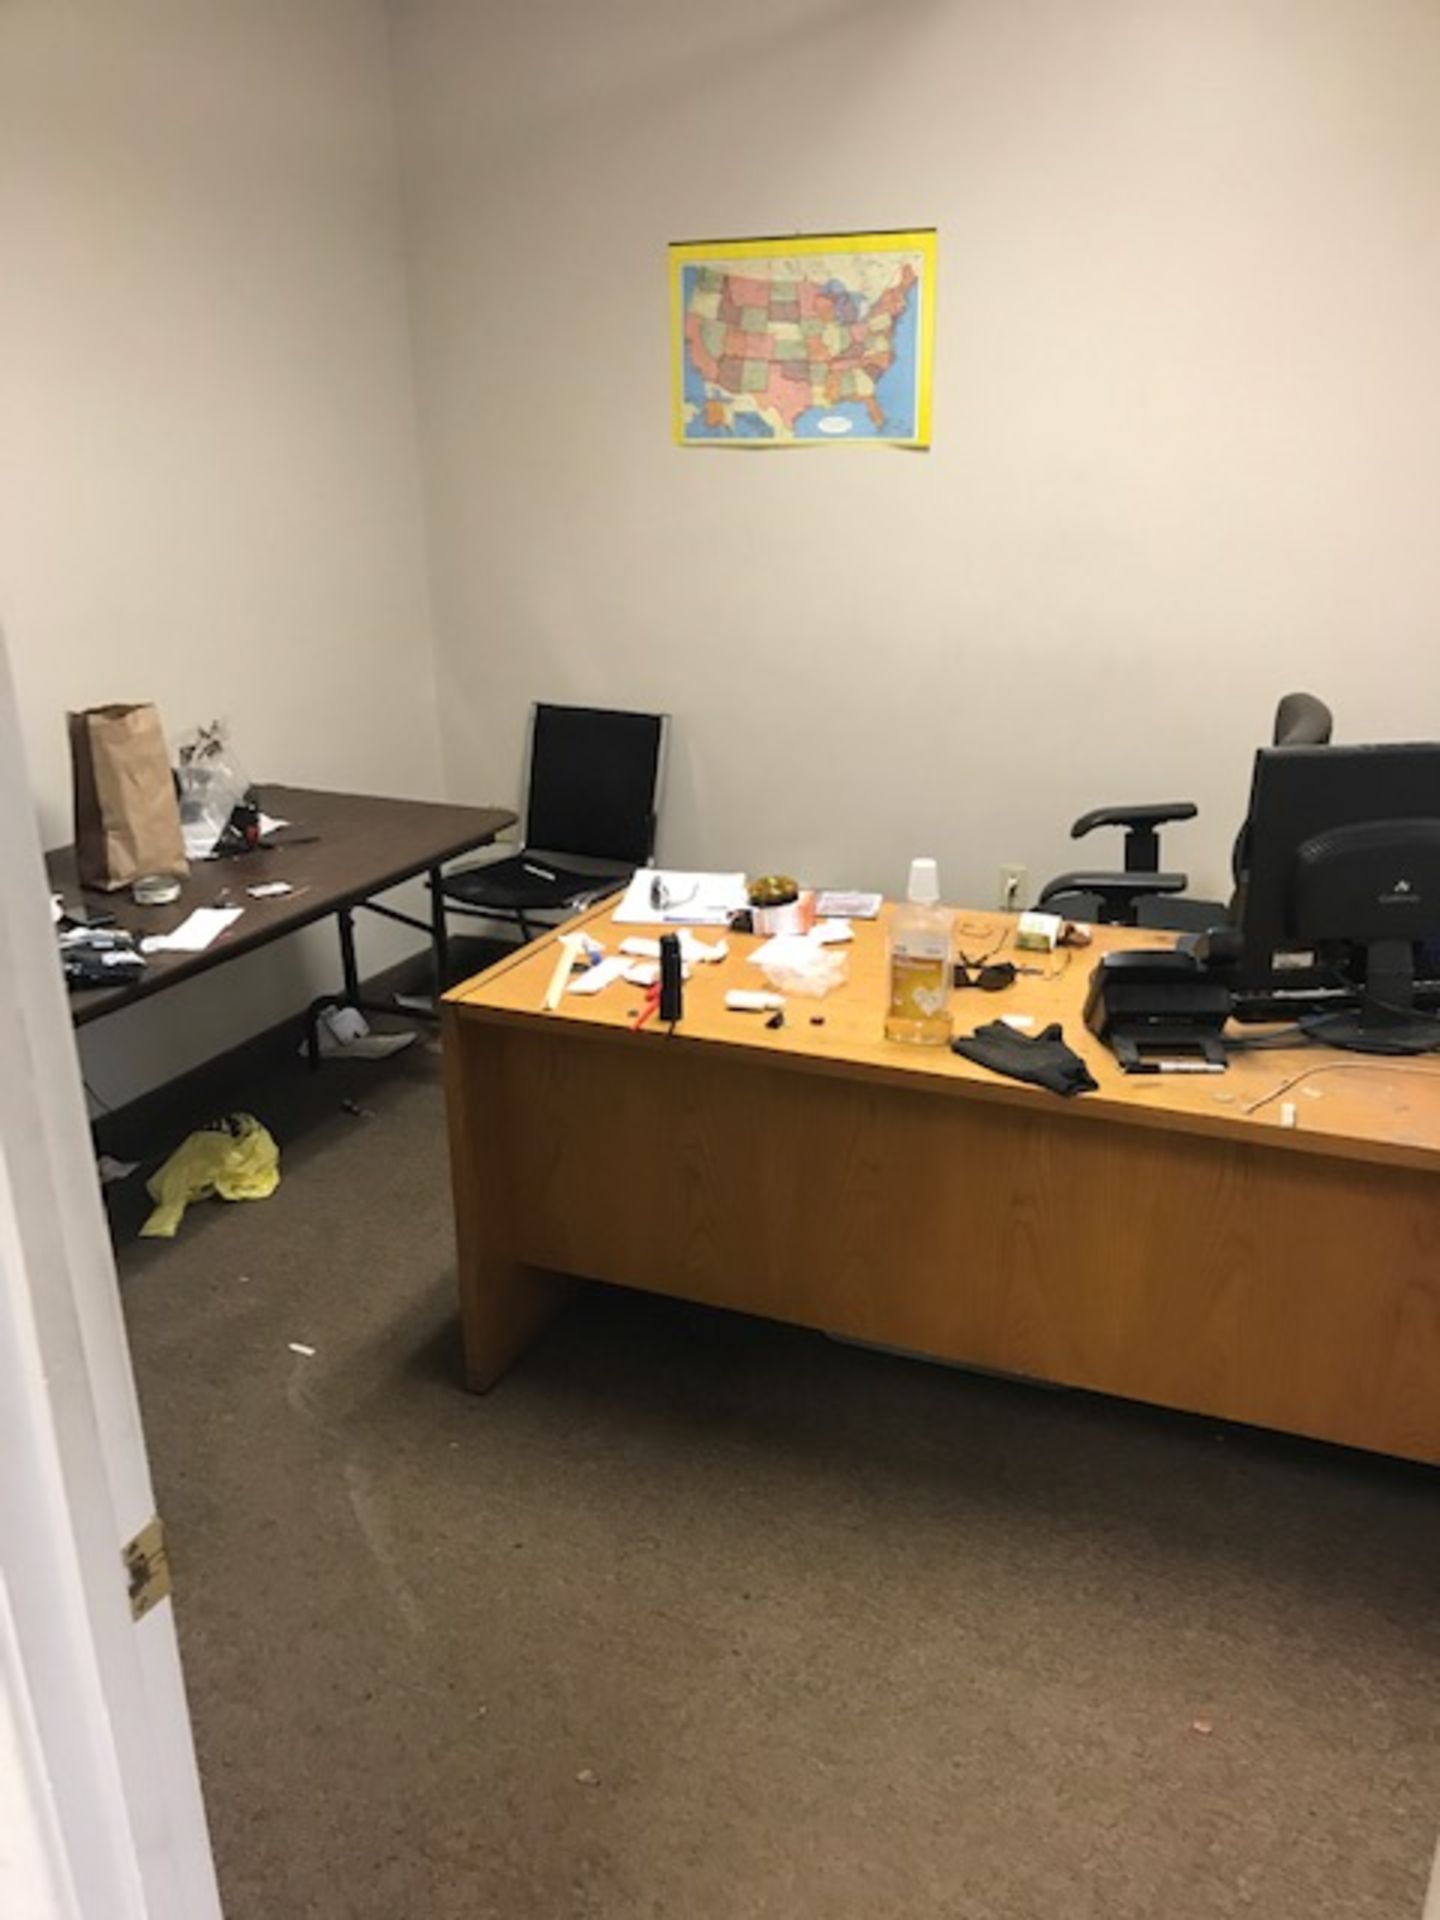 {LOT} Balance in Offices Furniture, Etc. (No Paperwork/Files)